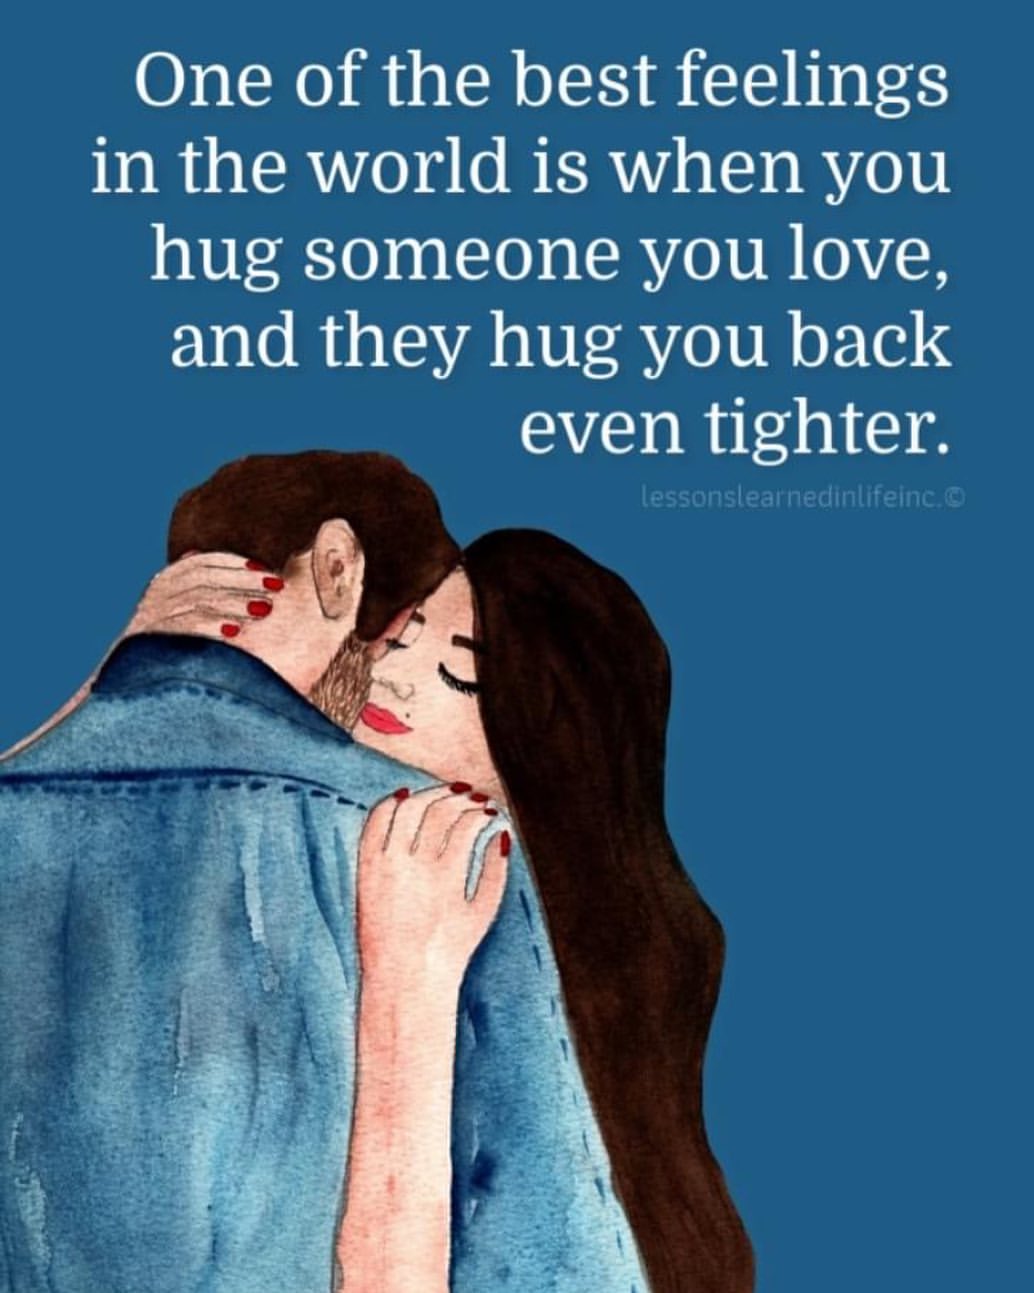 One of the best feelings in the world is when you hug someone you love, and they hug you back even tighter.